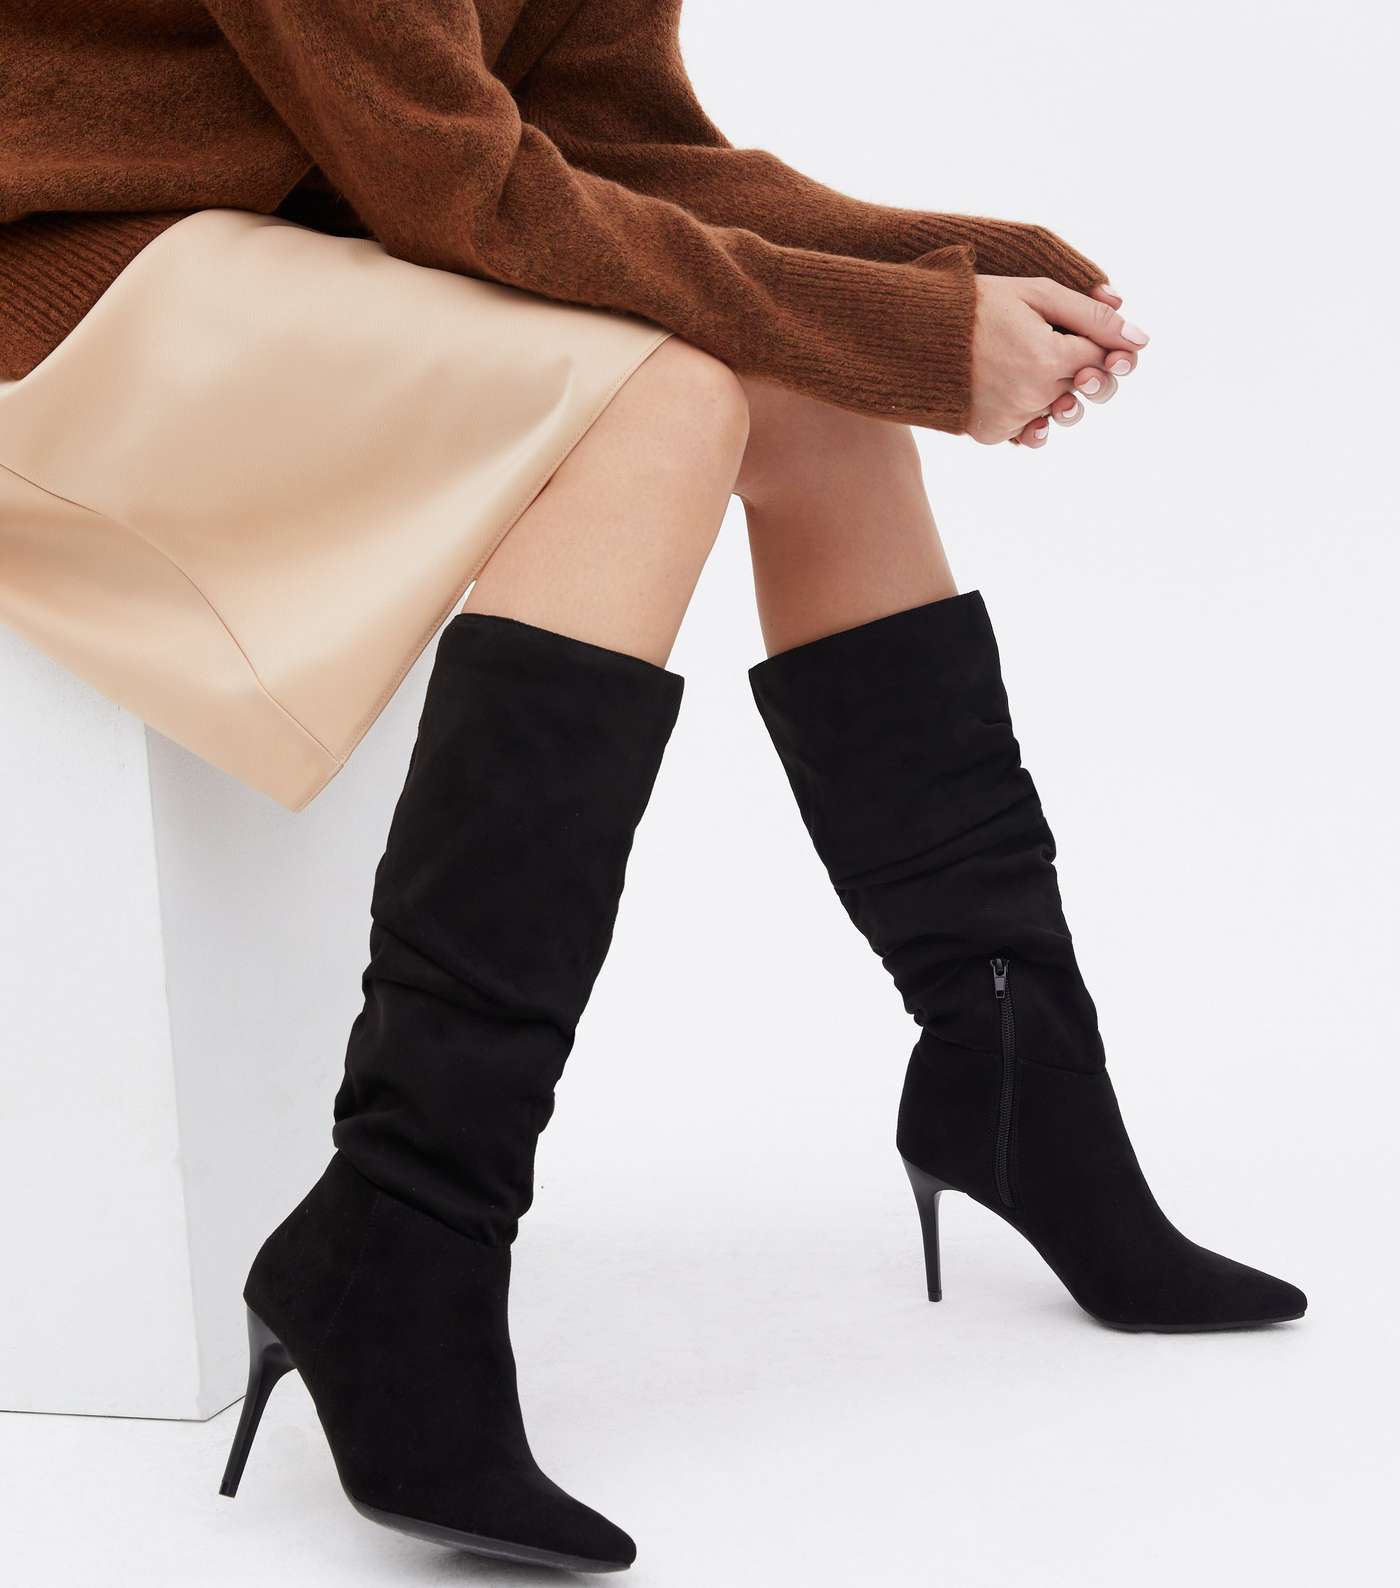 Black Stiletto Heel Slouch Knee High Boots Image 2